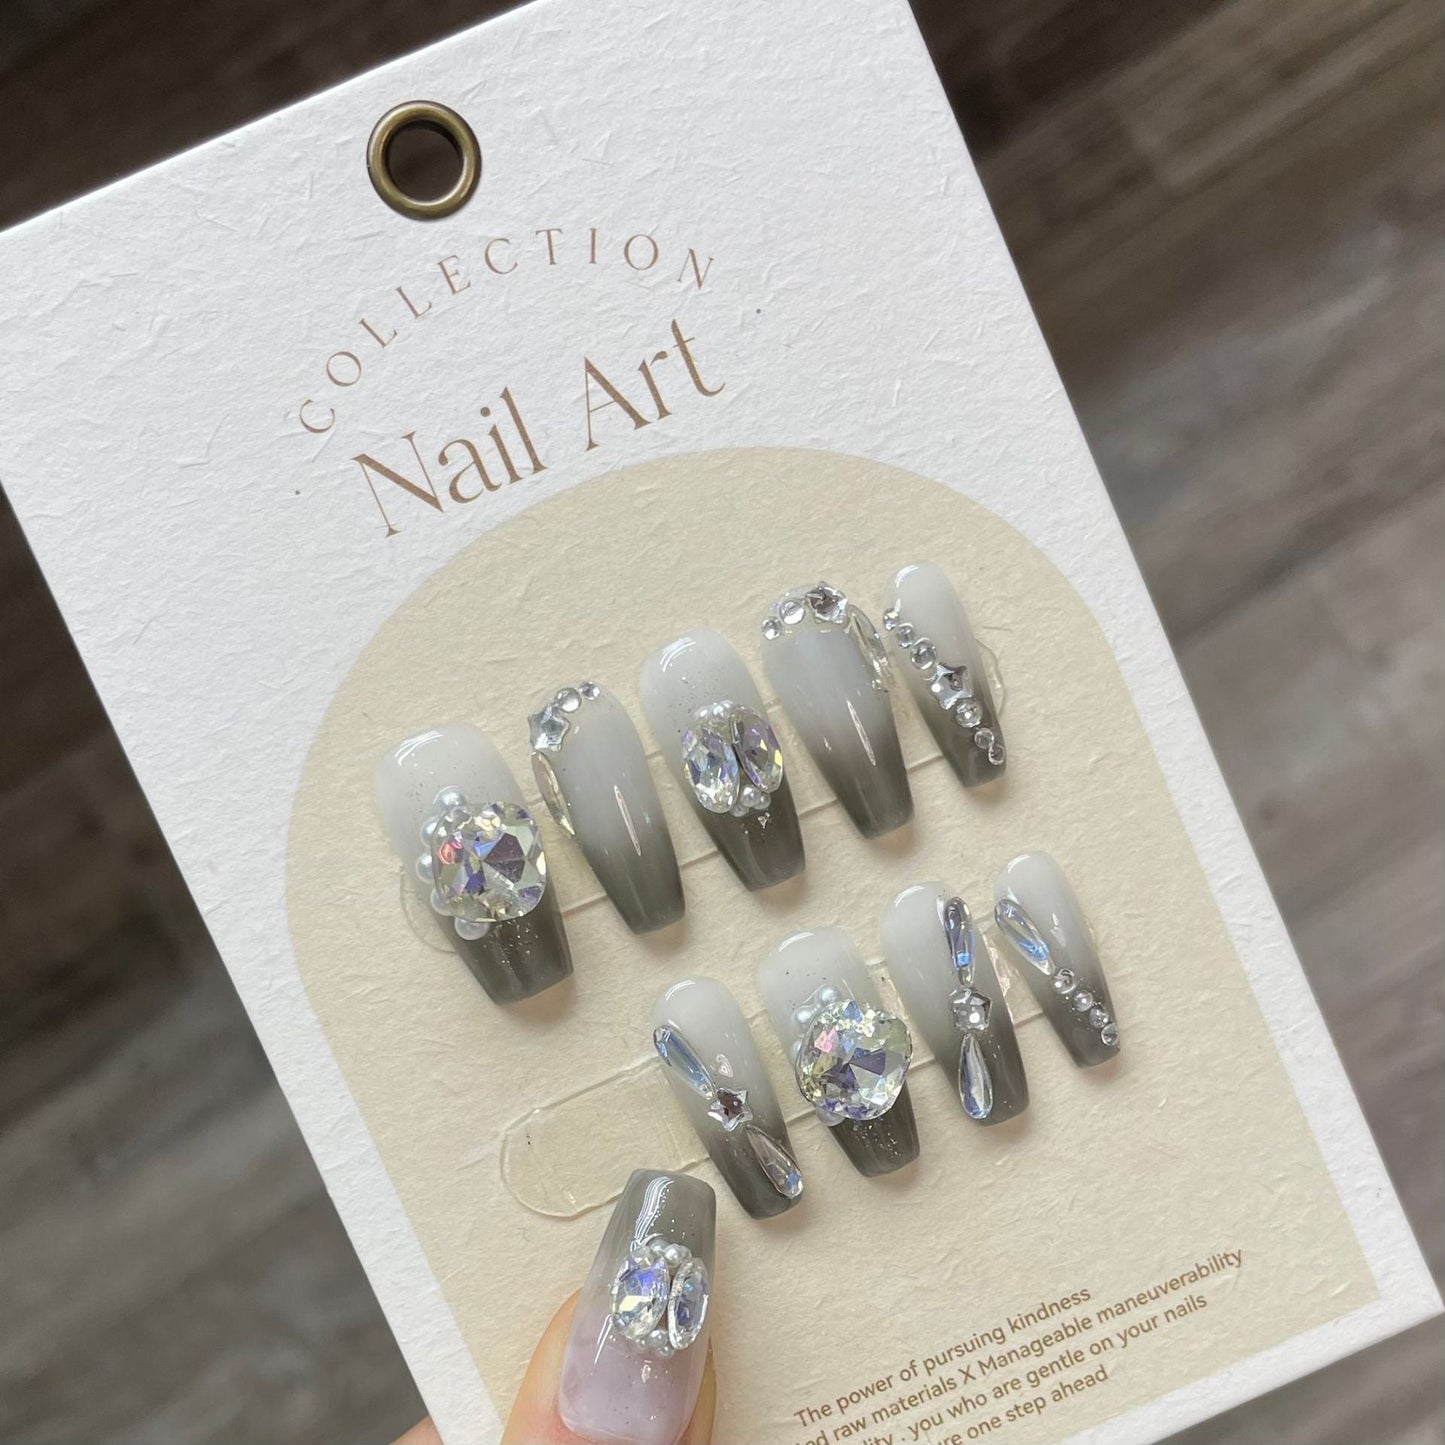 847 Presse style strass sur ongles 100% faux ongles faits main gris